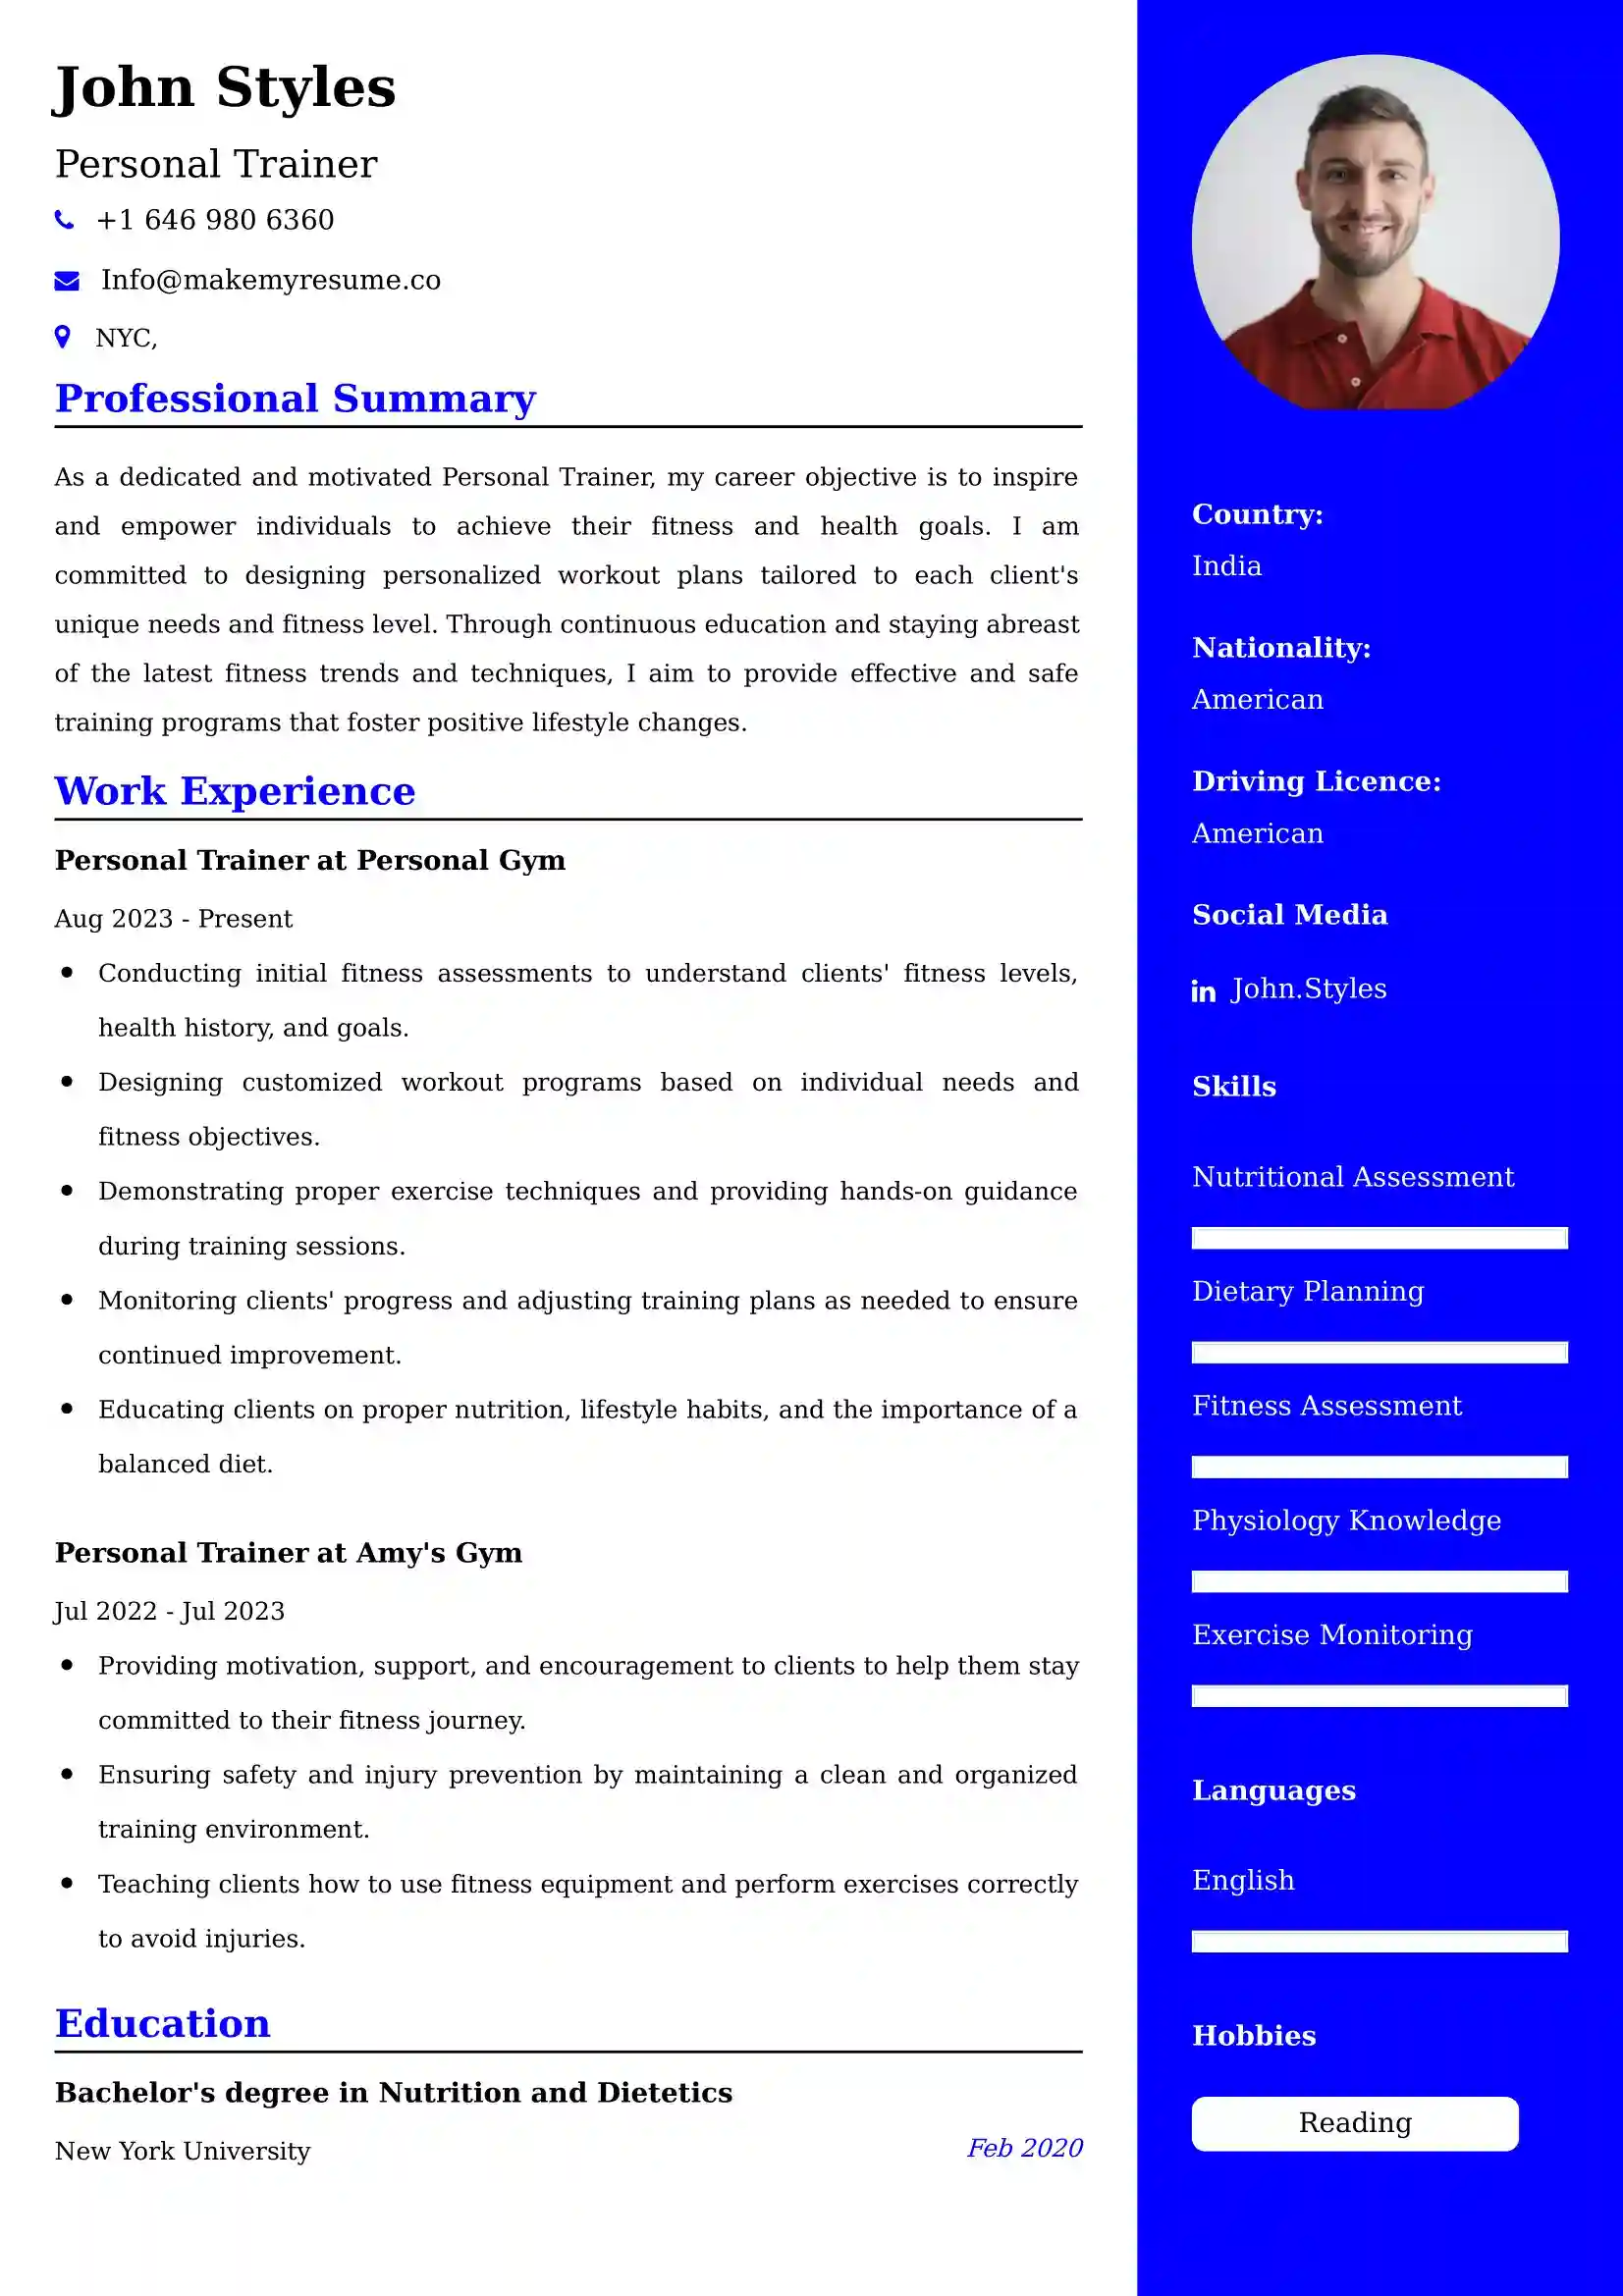 Personal Trainer Resume Examples for UK Jobs - Tips and Guide